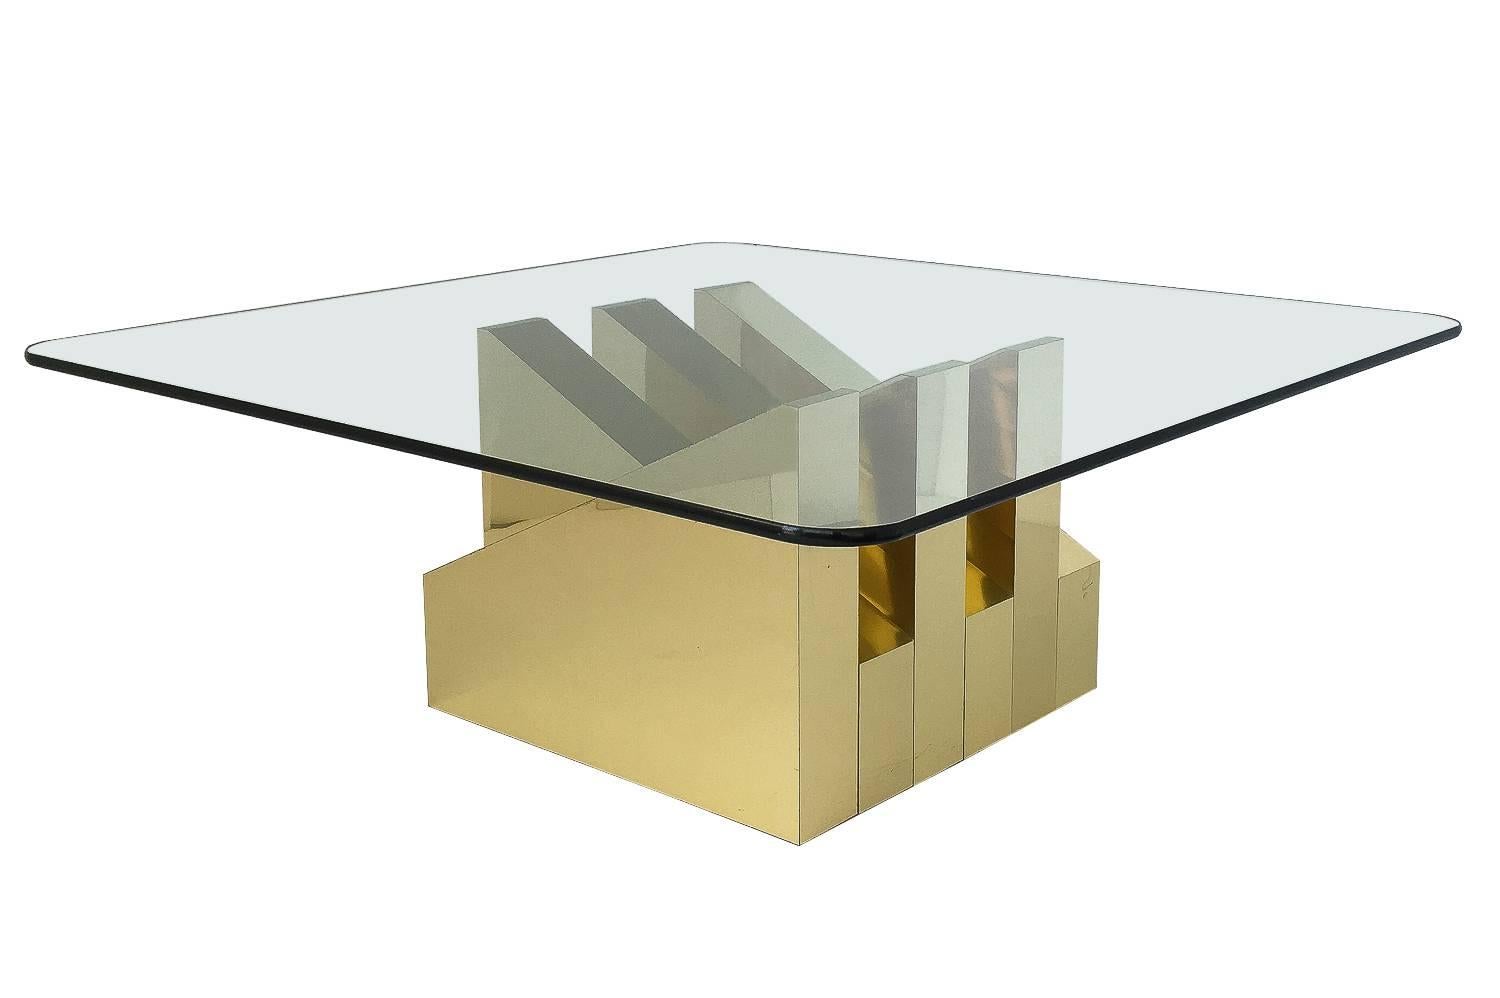 Modern and sculptural brass clad coffee table, circa 1970s. Mirror polished brass clad square base with six triangular forms. Geometric and abstract in form. Base measures 20